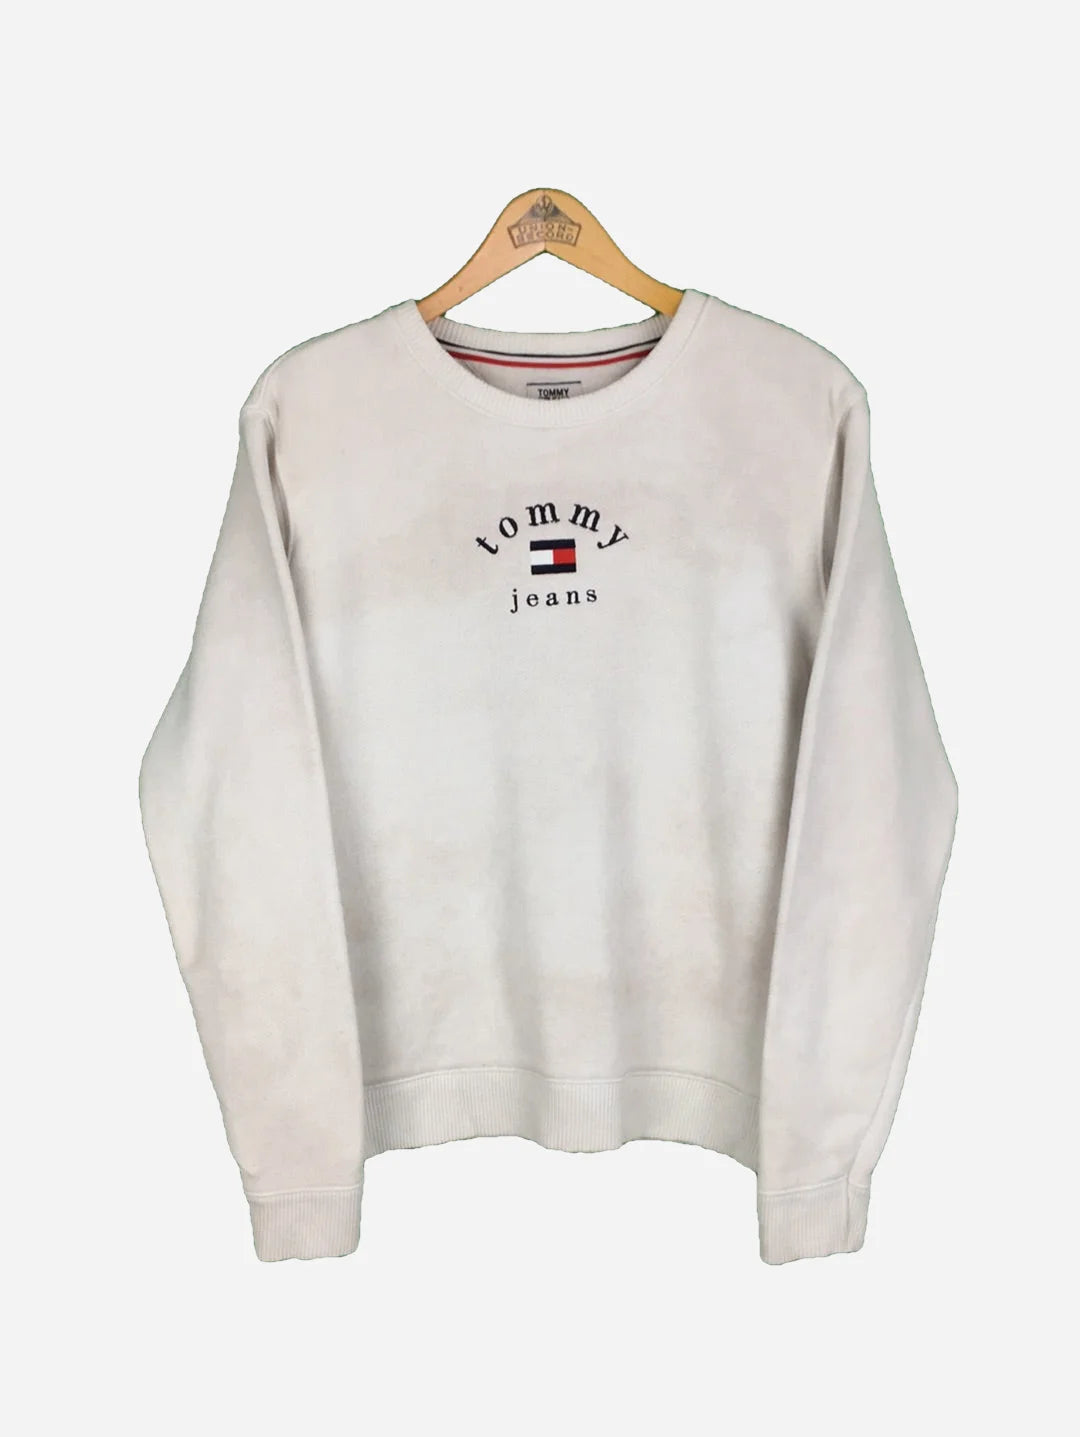 Tommy Hilfiger Sweater (S)